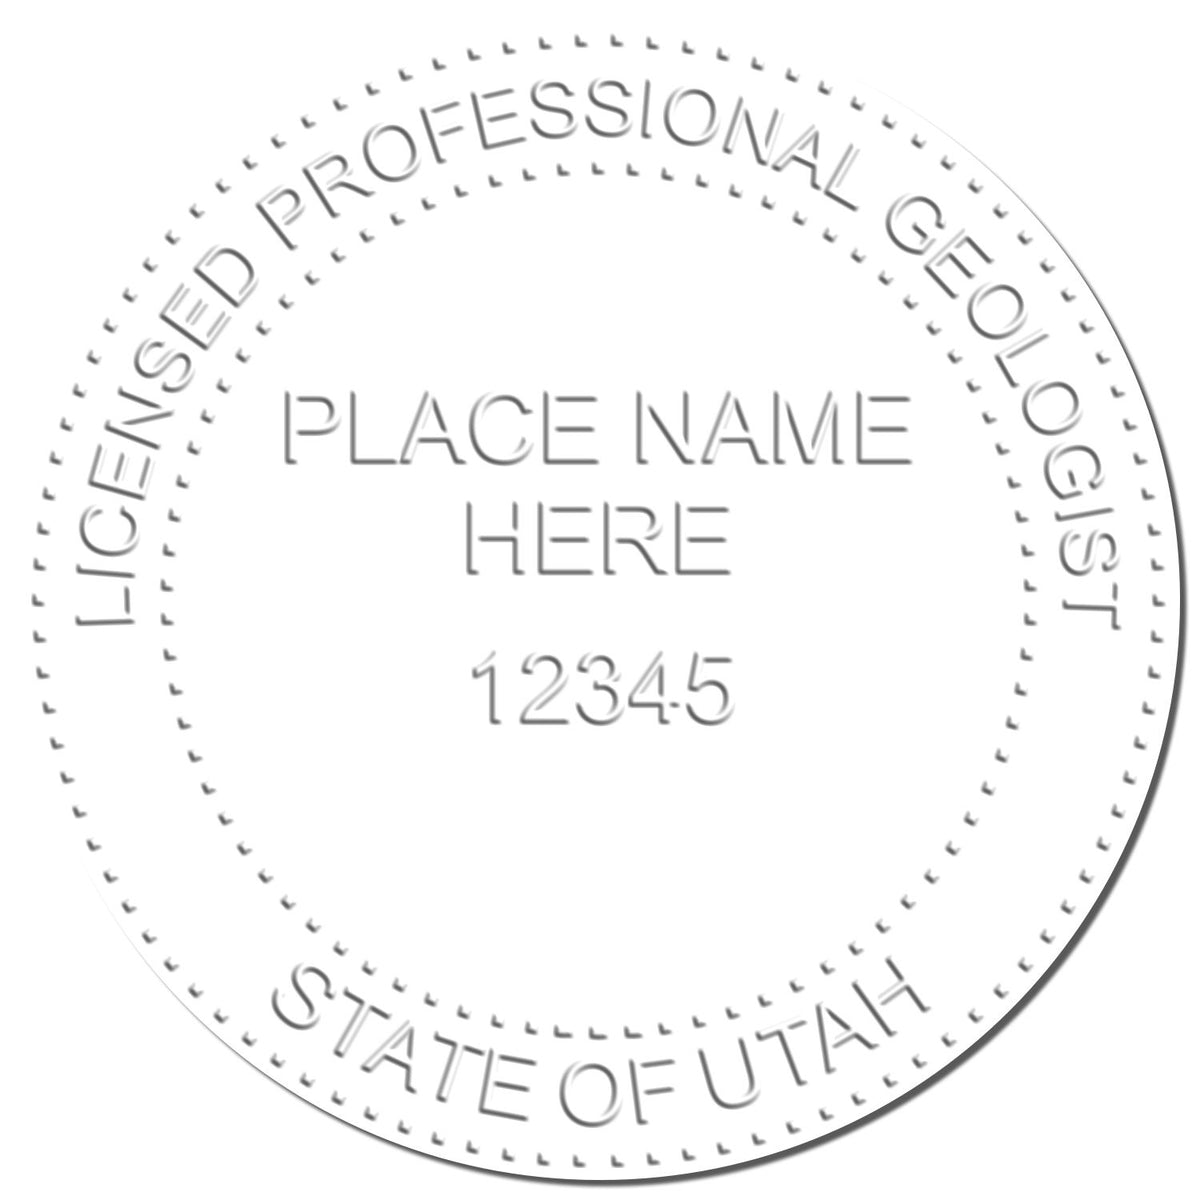 The Utah Geologist Desk Seal stamp impression comes to life with a crisp, detailed image stamped on paper - showcasing true professional quality.